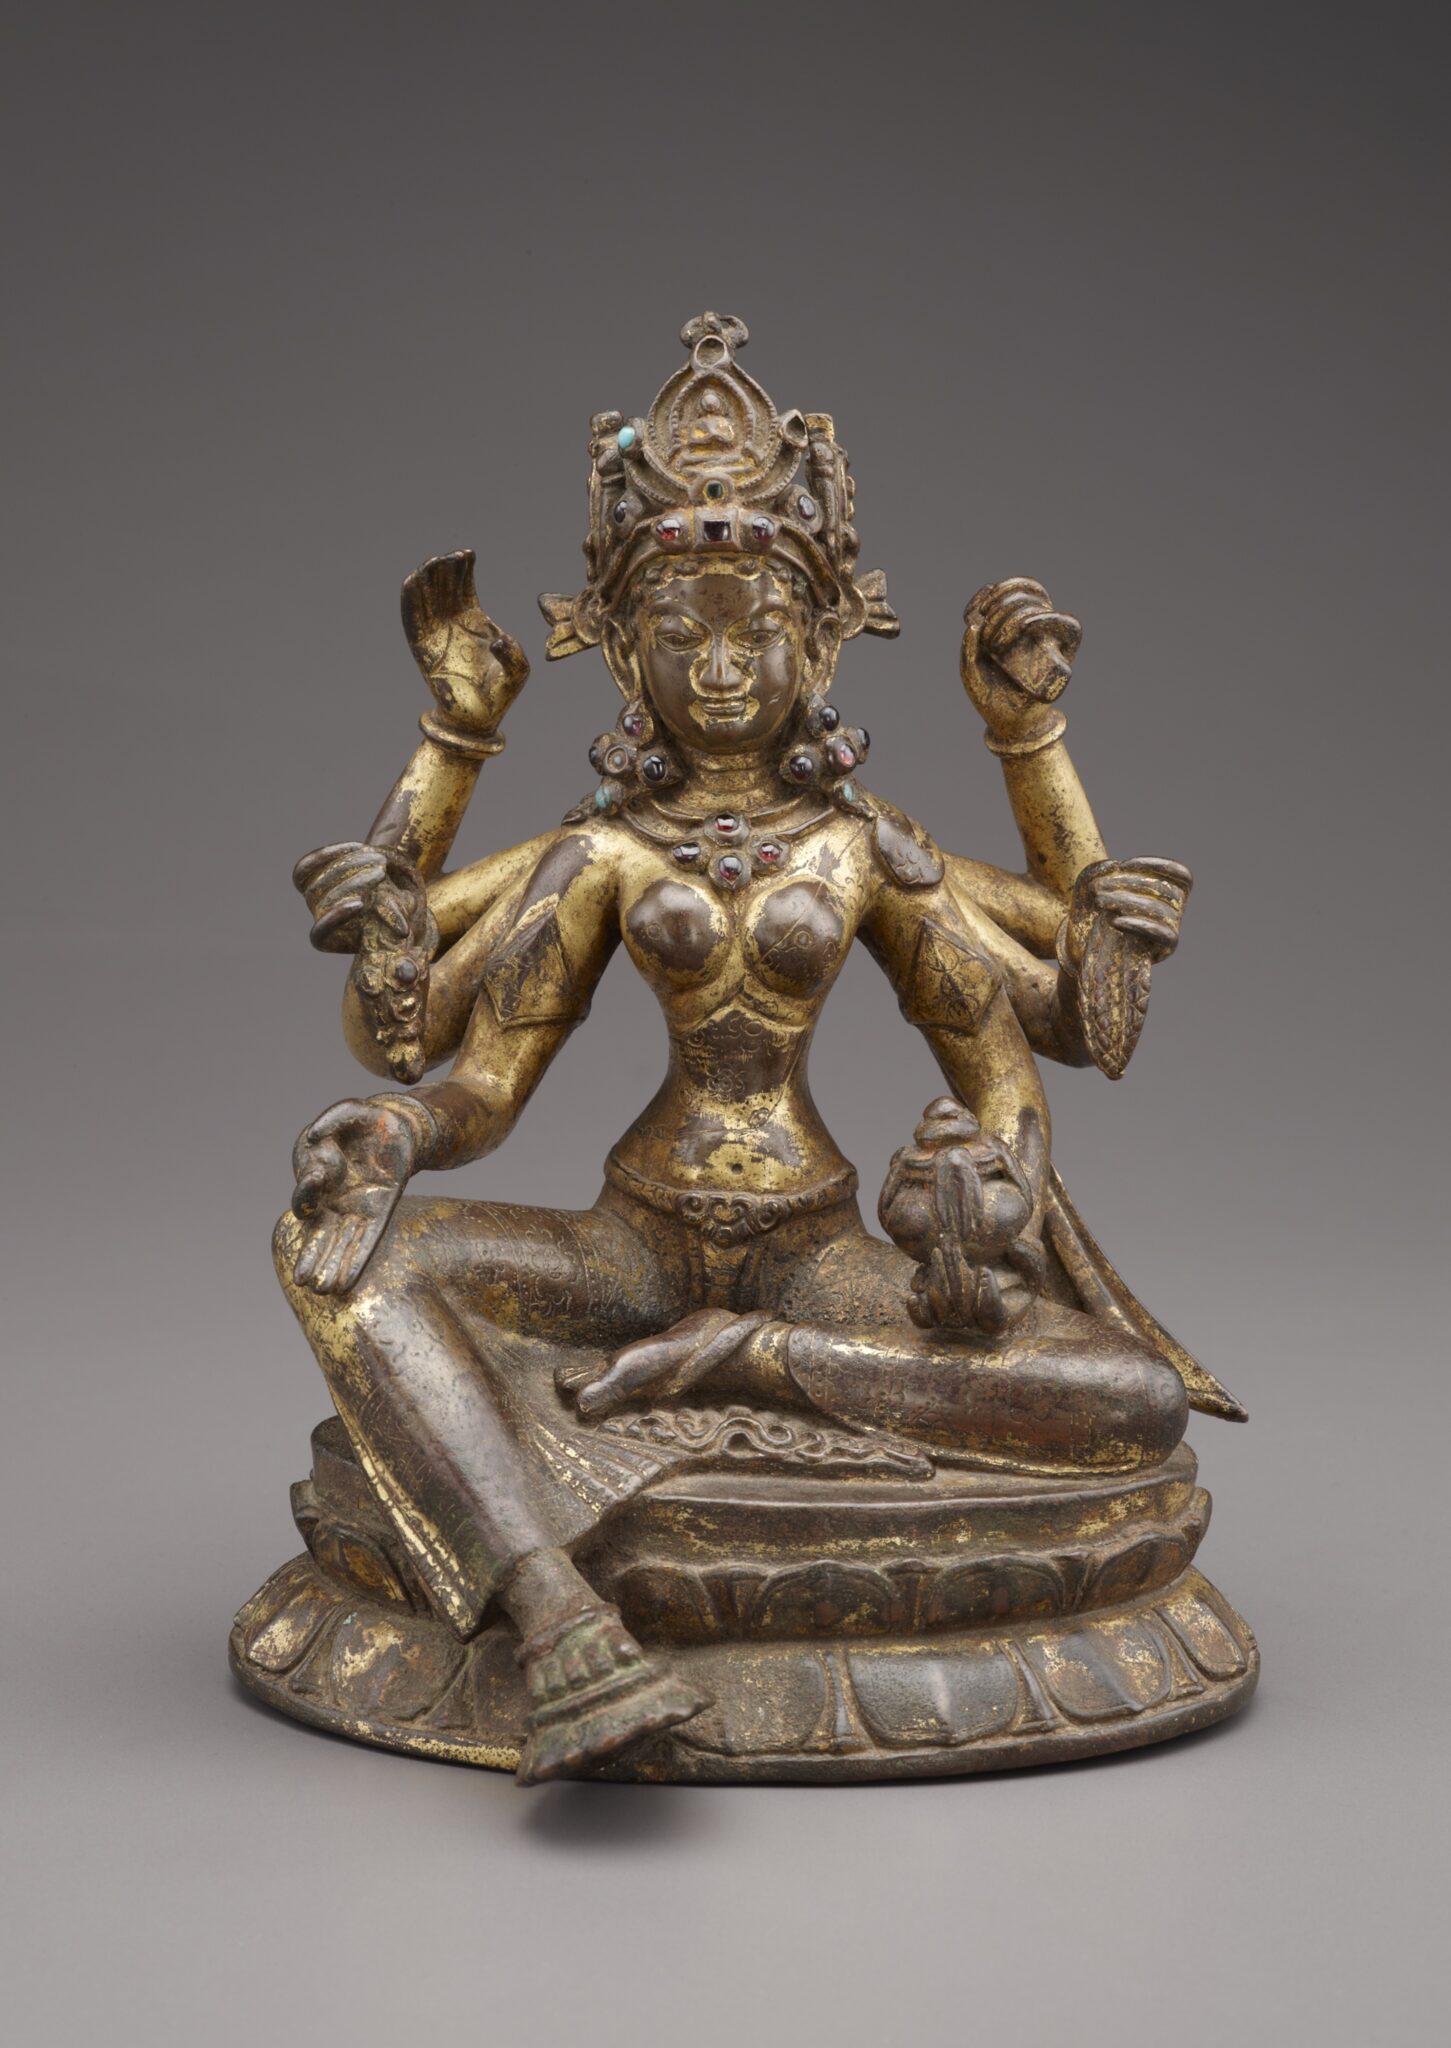 Tarnished gilded statuette depicting six-armed goddess seated on lotus pedestal; left foot rests on lotus blossom